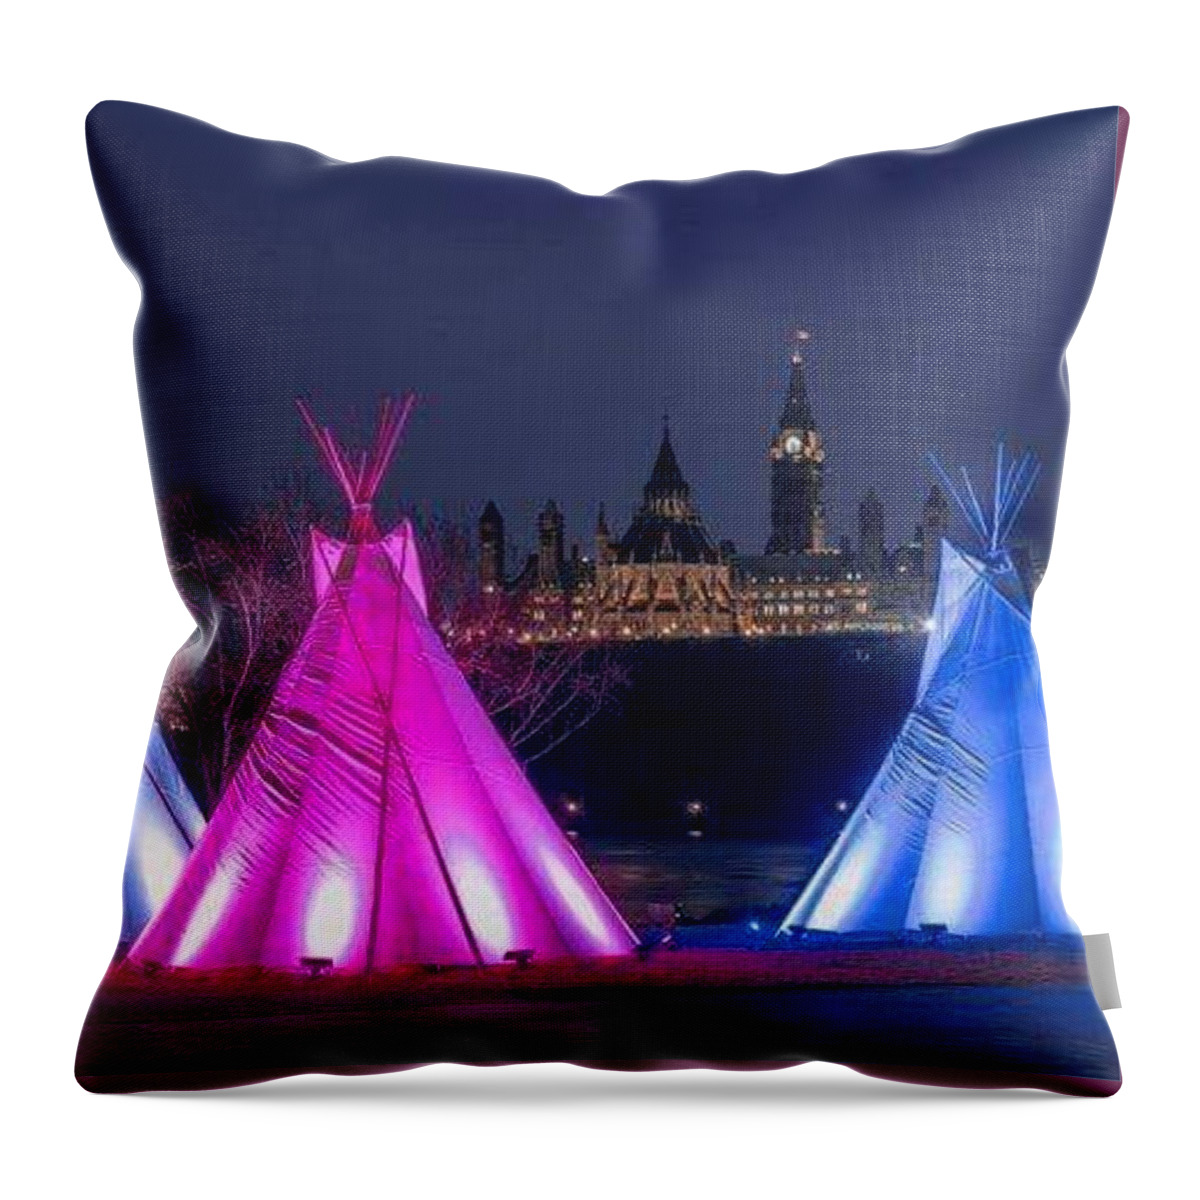 All Throw Pillow featuring the digital art Autochthone by Inuit People in Ottawa Canada KN9 by Art Inspirity